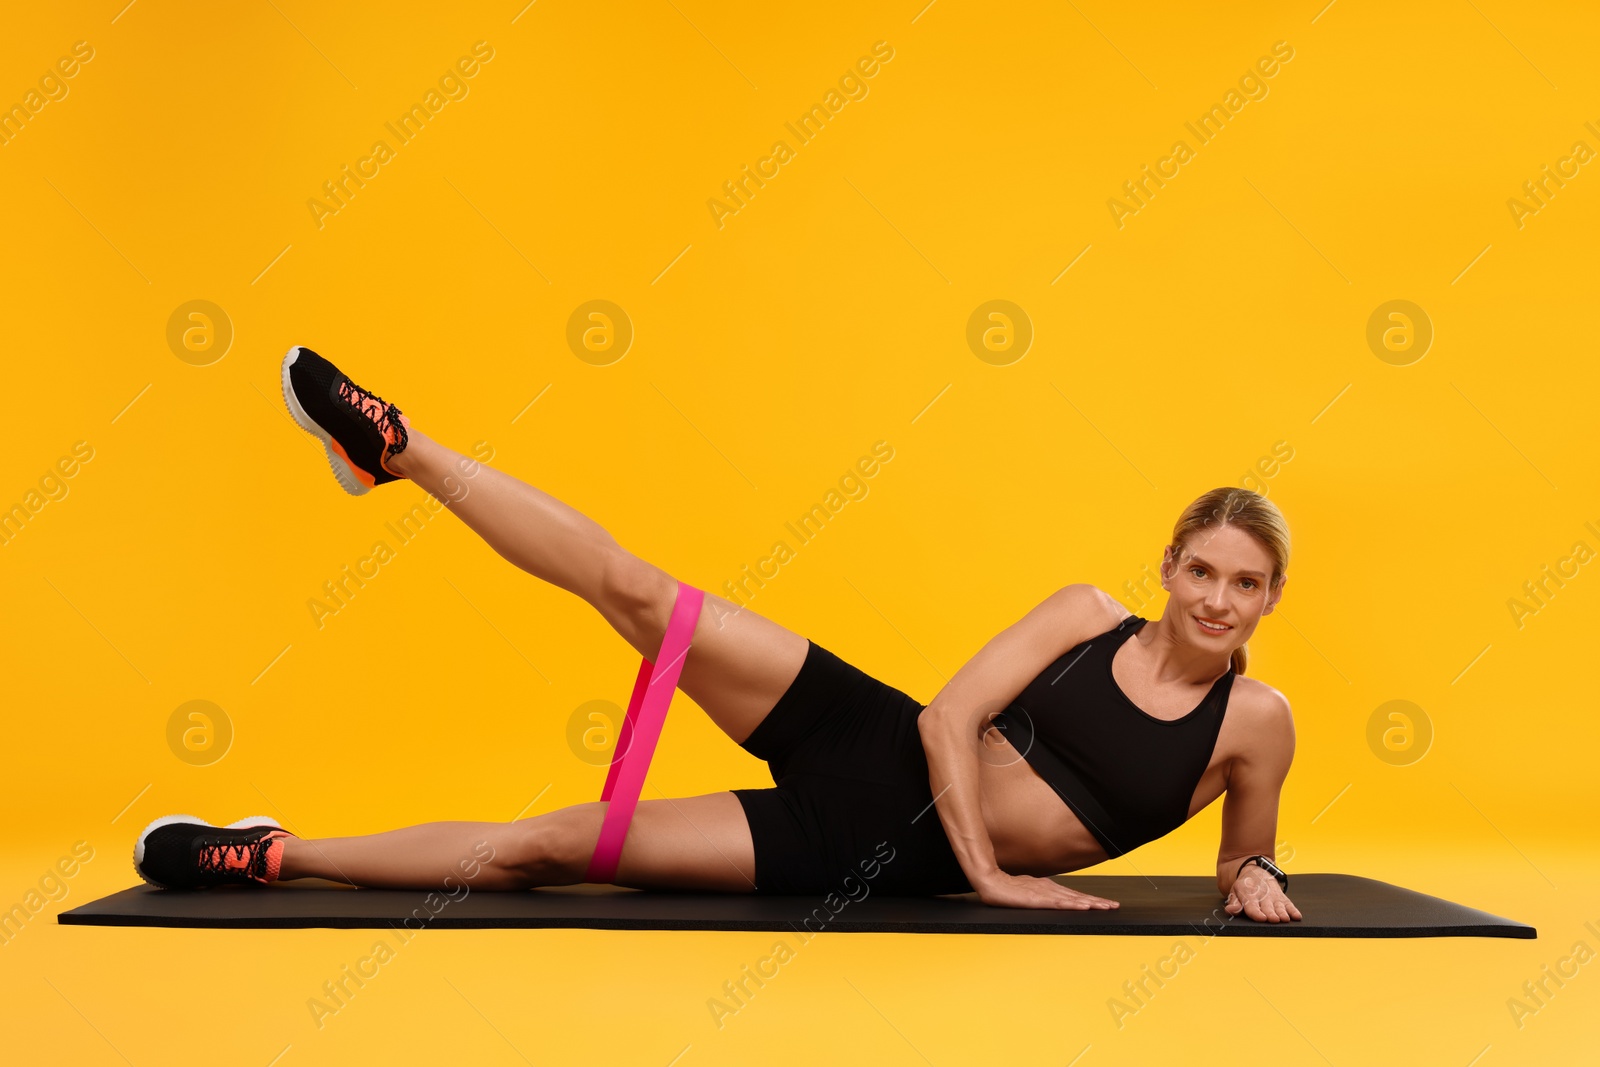 Photo of Woman exercising with elastic resistance band on fitness mat against orange background